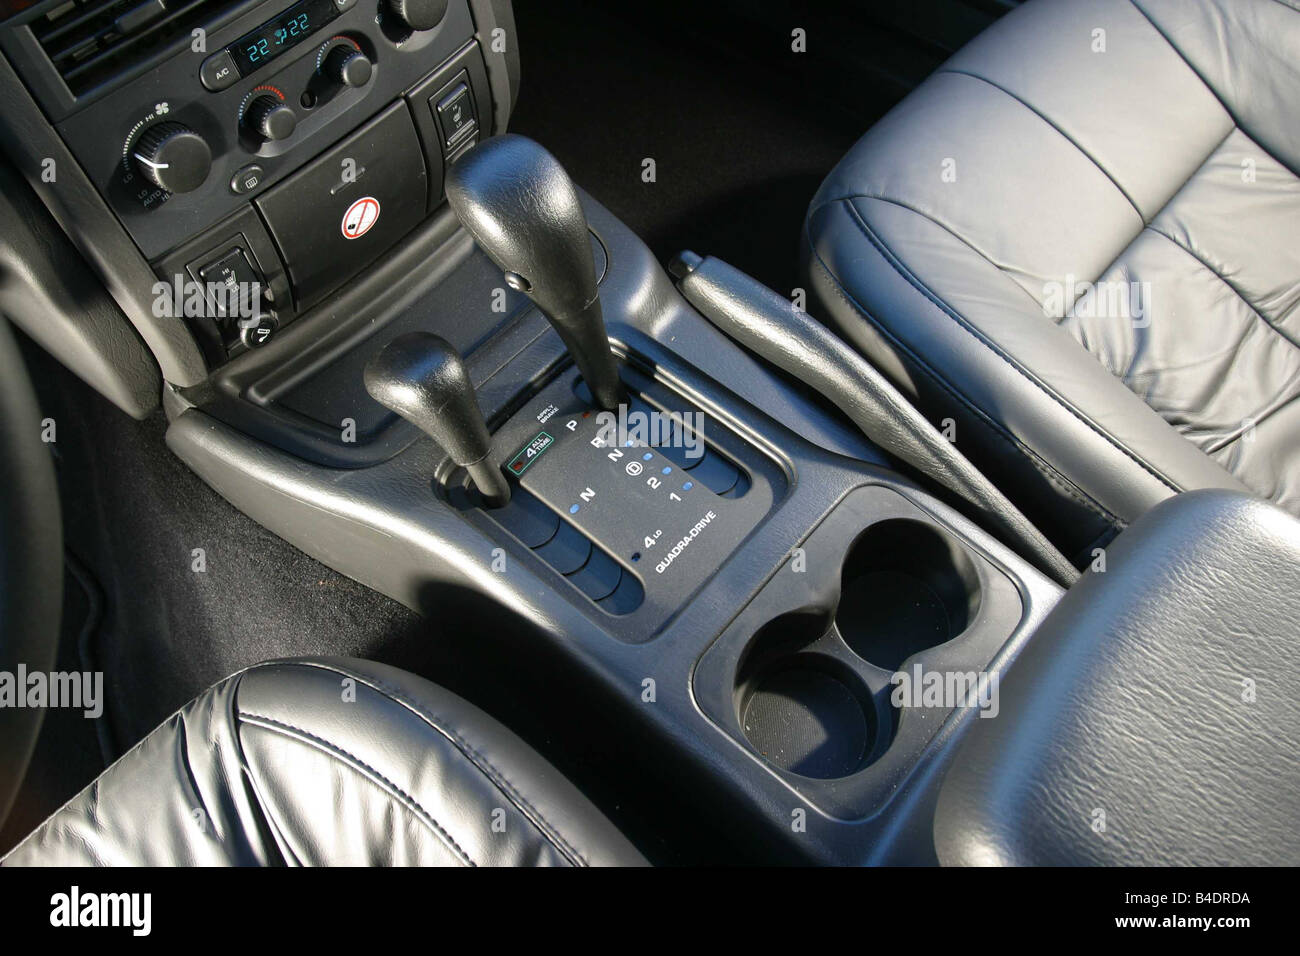 Car, Chrysler Jeep Cherokee V8, cross country vehicle, model year 2001-, silver, Detailed view, Interior view Stock Photo